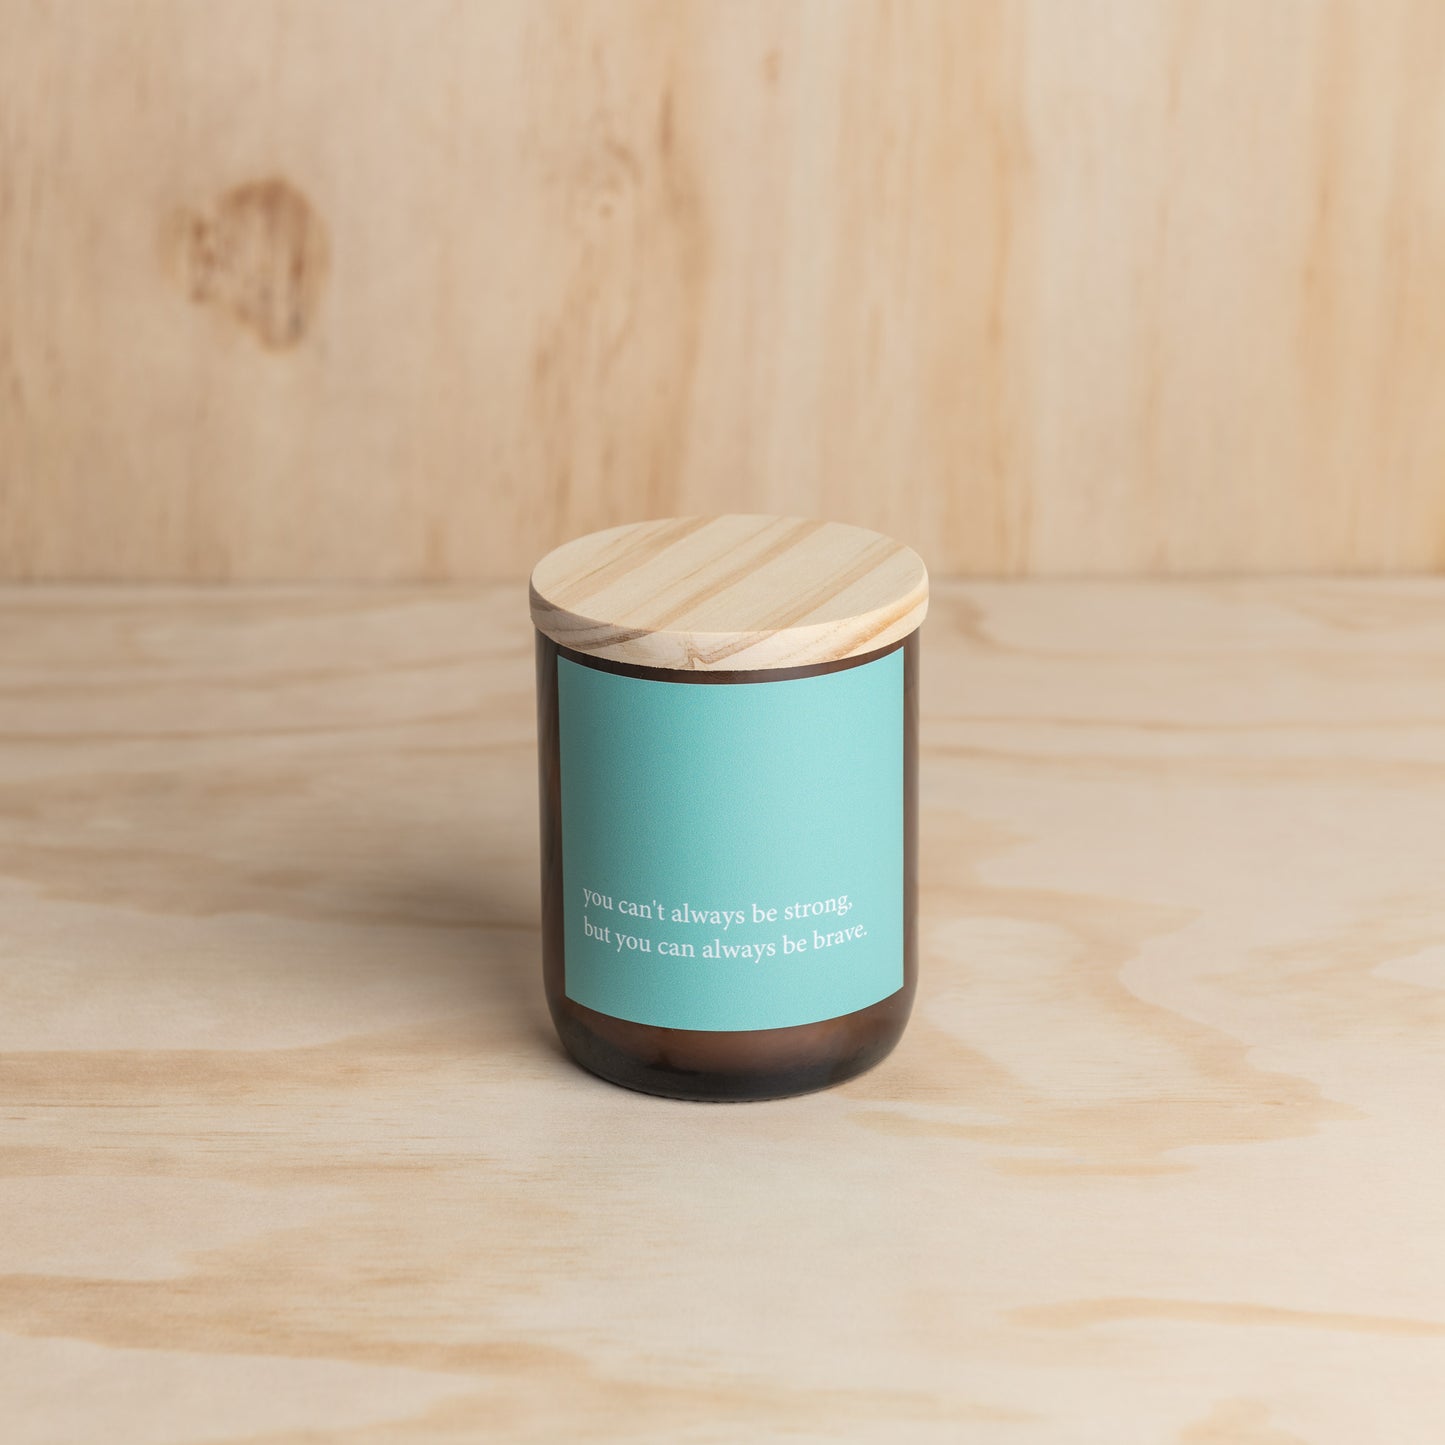 Heartfelt Quote Candle - be brave